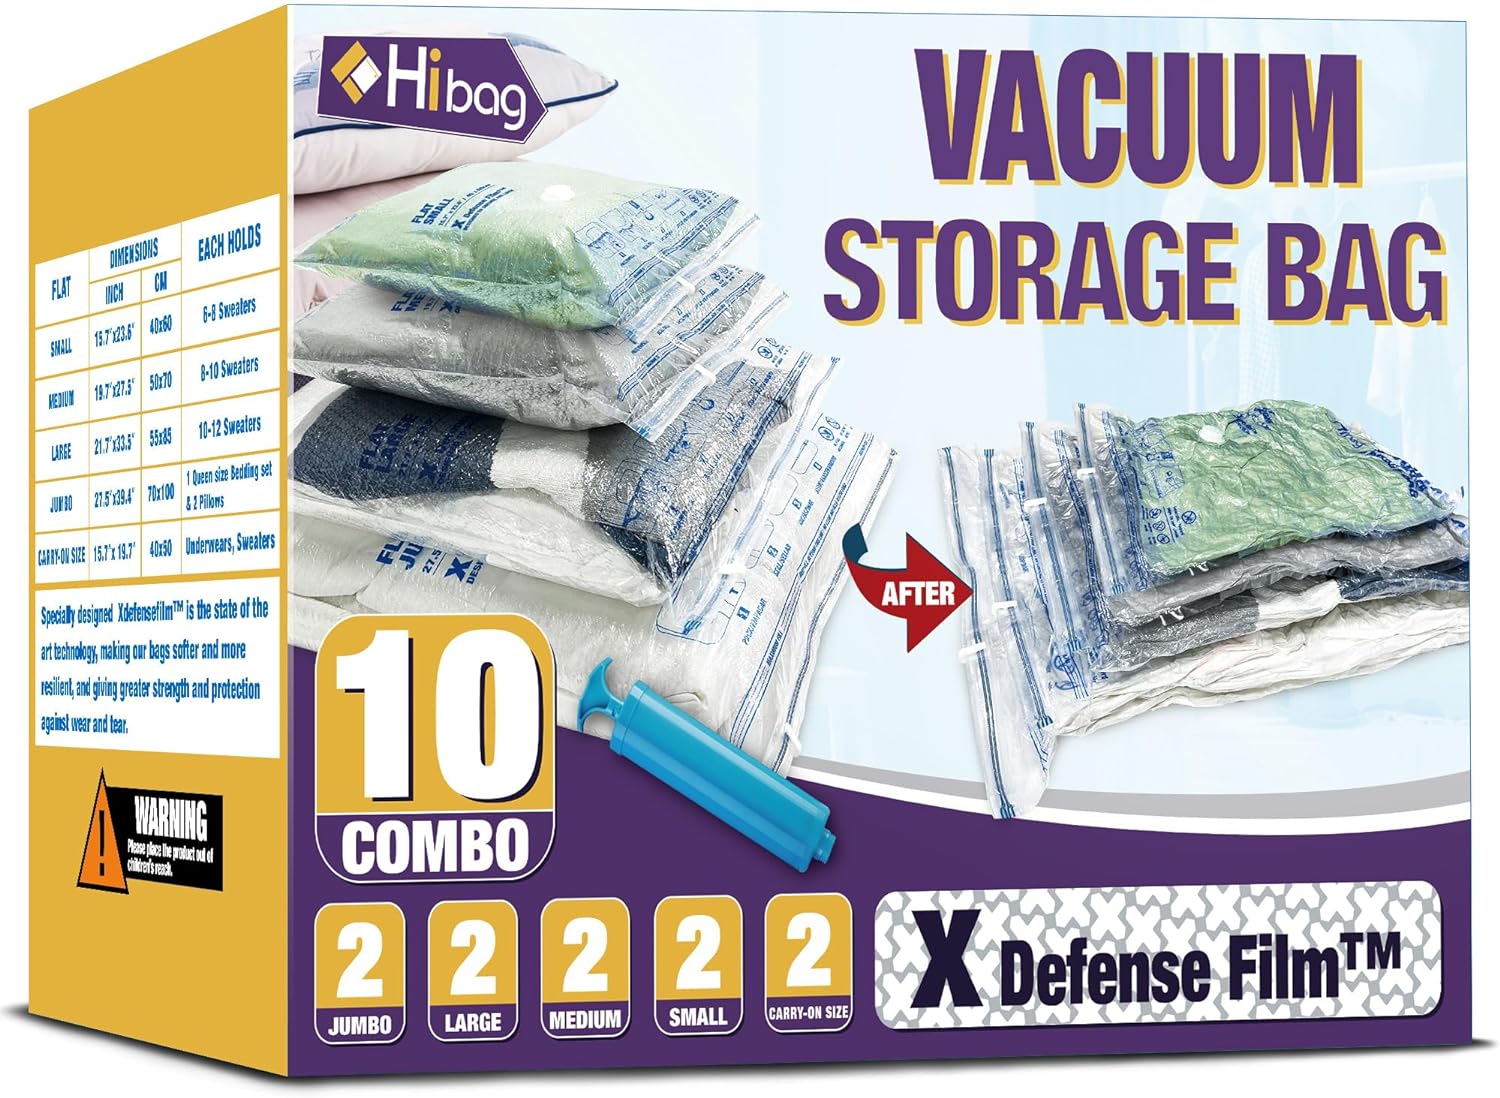 HIBAG Vacuum Storage Bags, 10-Pack Vacuum Seal Bags for Clothing Clothes, Space Saver Bags (2 Jumbo, 2 Large, 2 Medium, 2 Small, 2 Roll-up) with Pump (10-Combo)